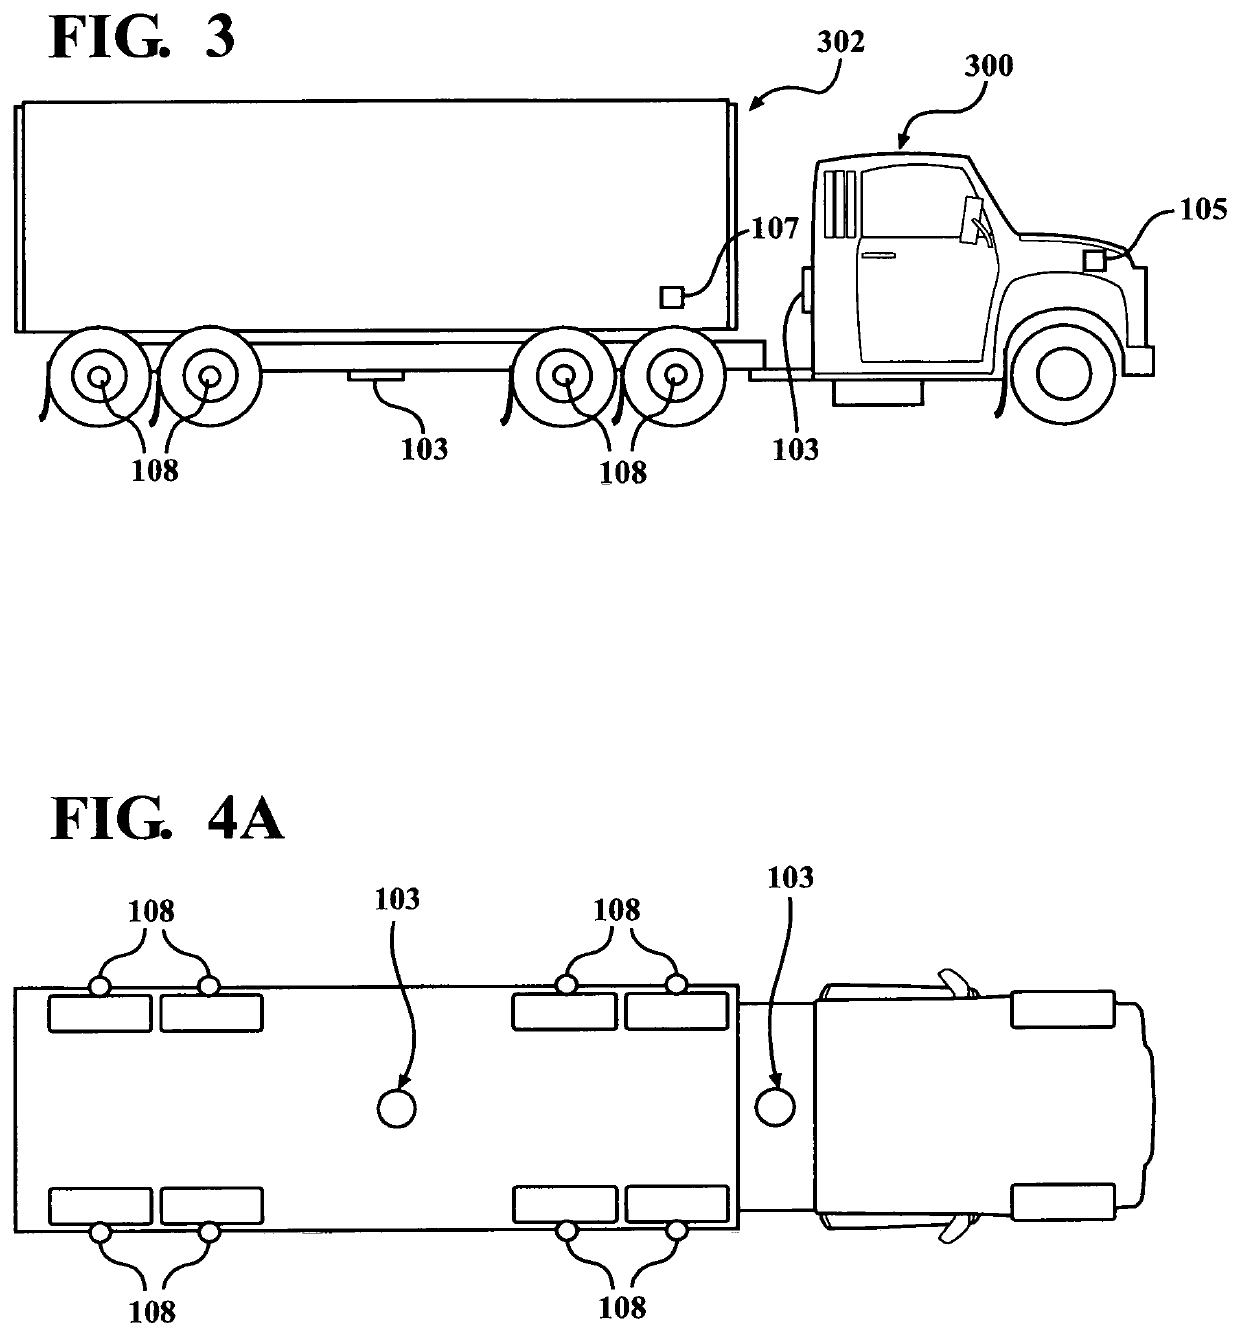 Apparatus and method for vehicular monitoring, analysis, and control